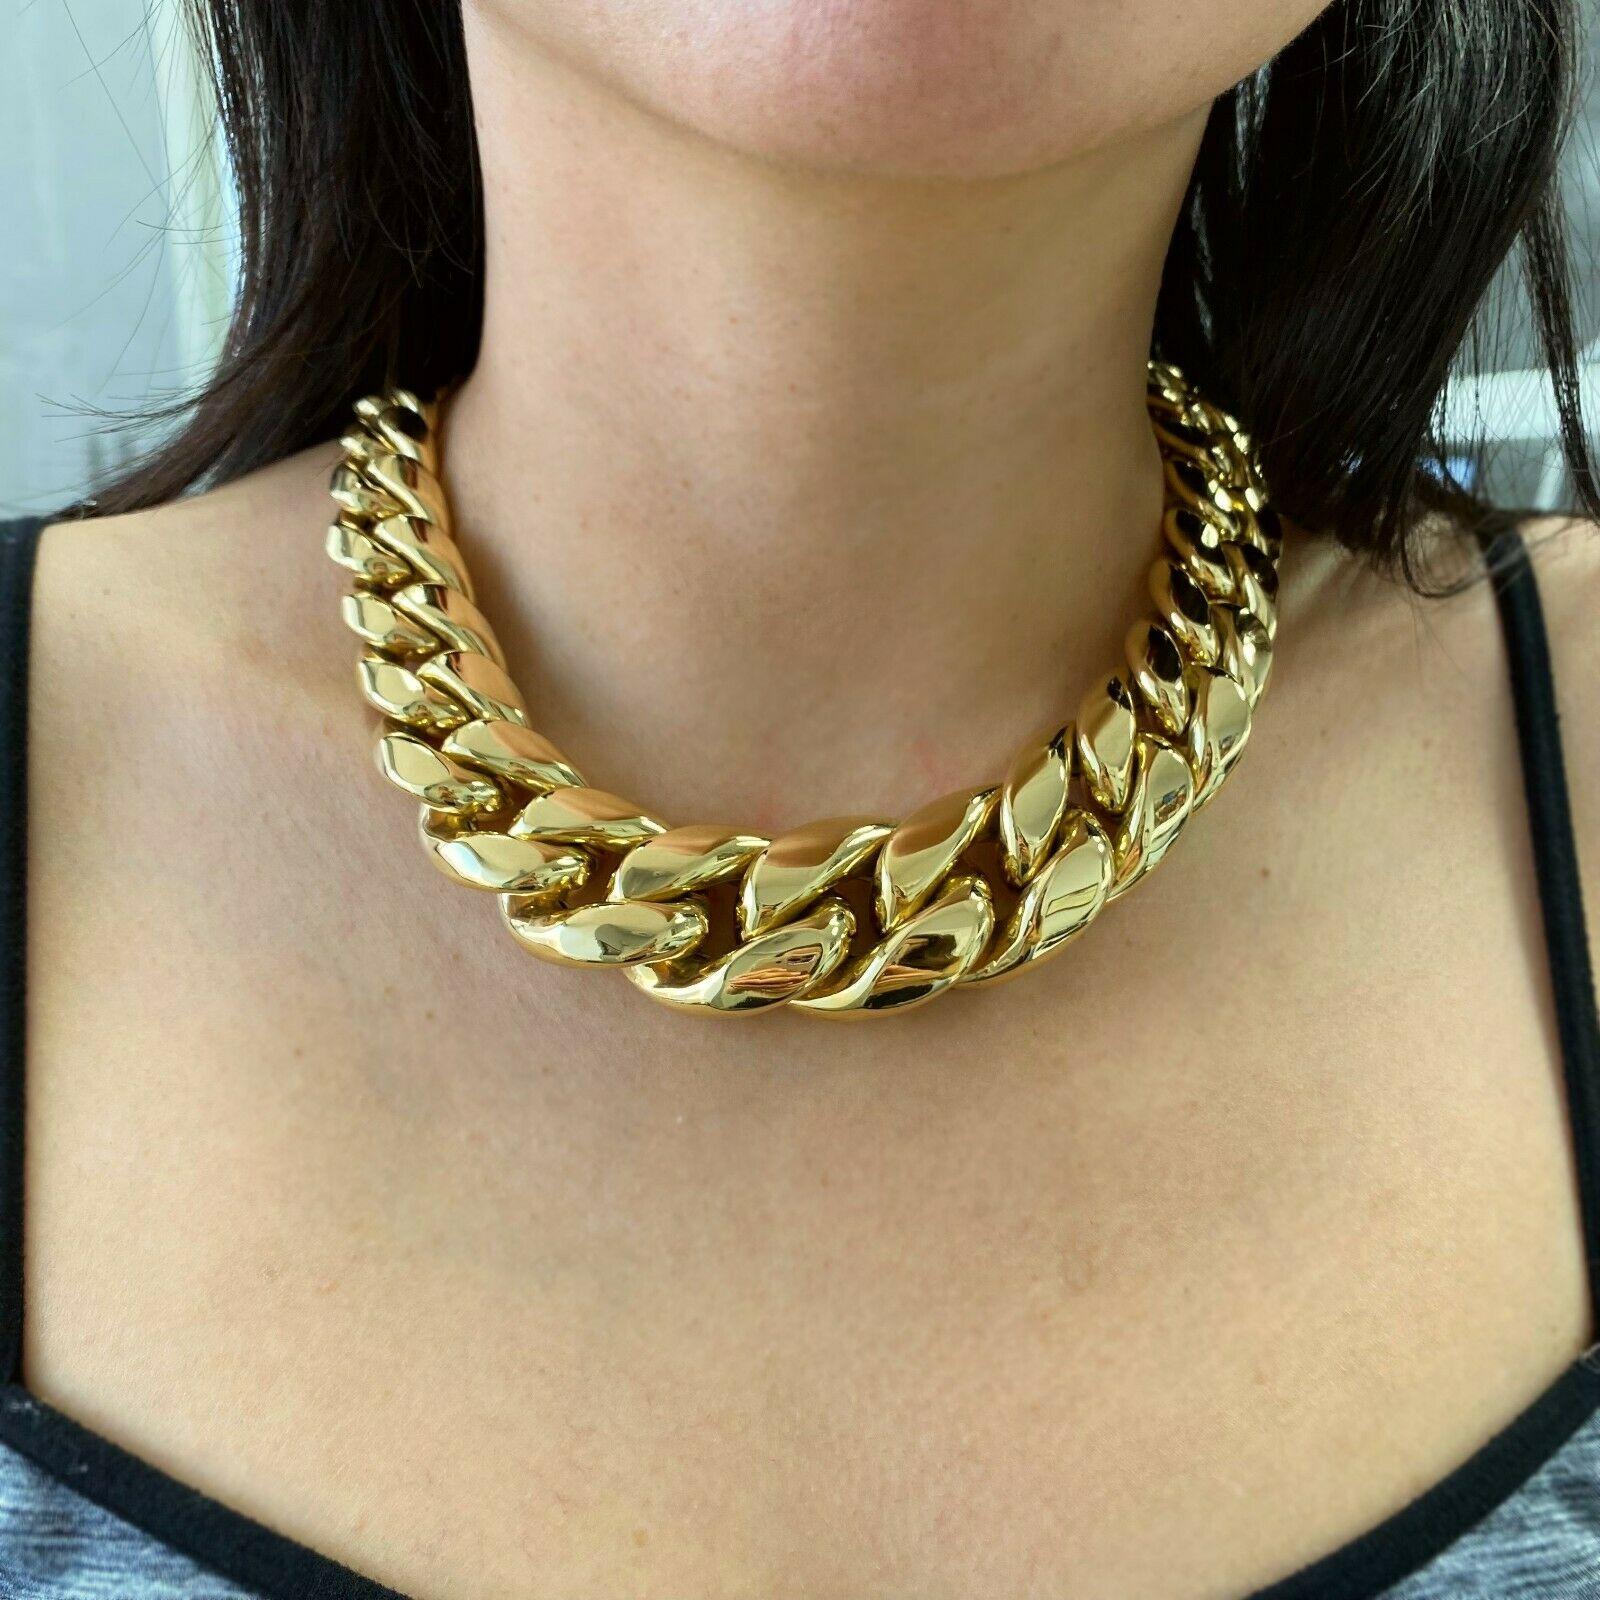 Very Unique beautiful necklace
Condition:
Seller Notes:“IN VERY GOOD CONDITION”
Style:Chain, Choker
Type:Chain
Item Length:18 in
Metal Purity:18k
Metal:Yellow Gold
Chain Width:30 MM to 15 MM
Chain Thickness:11.55 to 6.43 MM